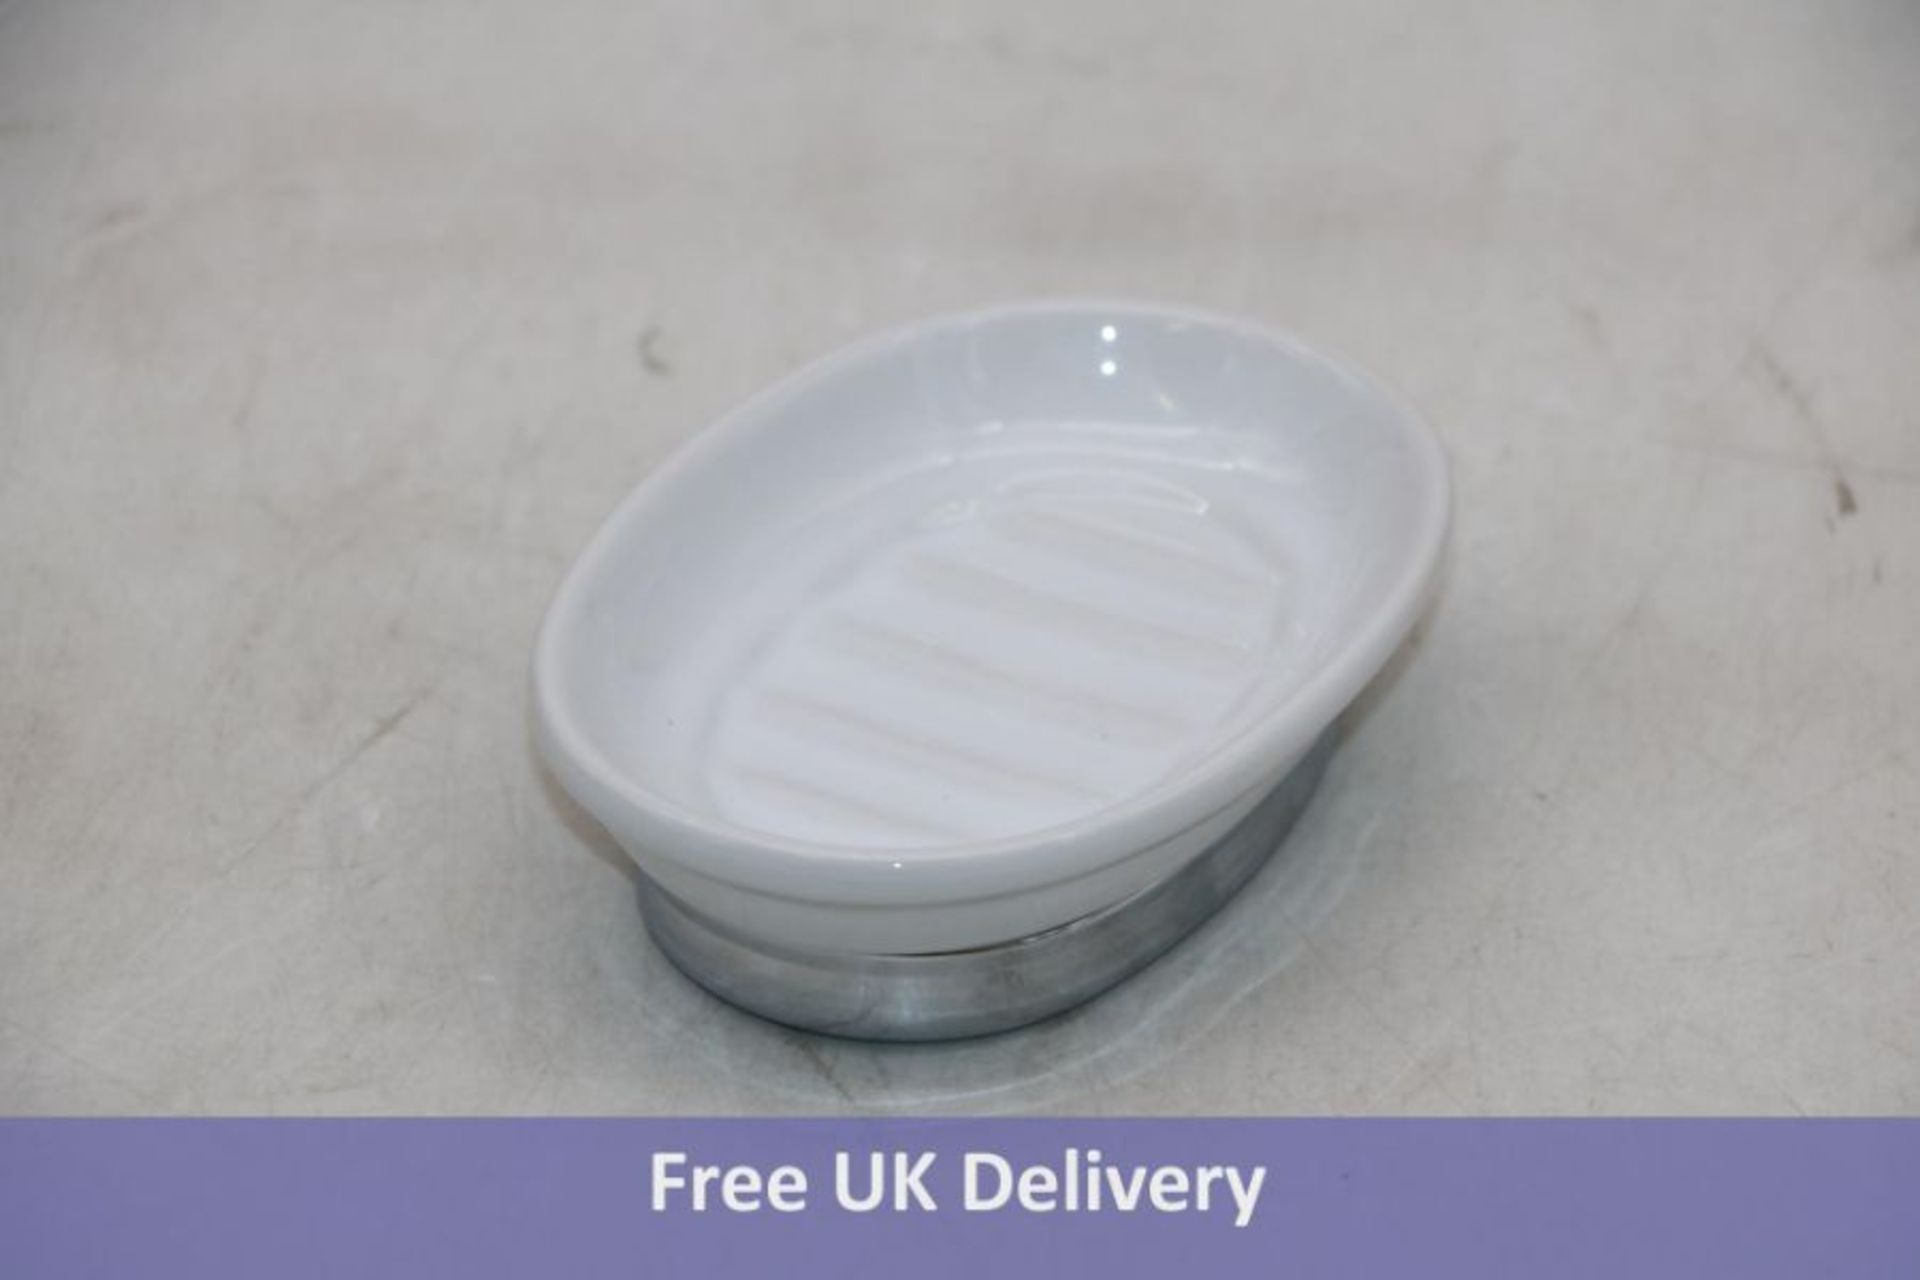 Twelve iDesign Soap Dish Holder, Oval Shaped Made of Ceramic and Metal - Image 2 of 2